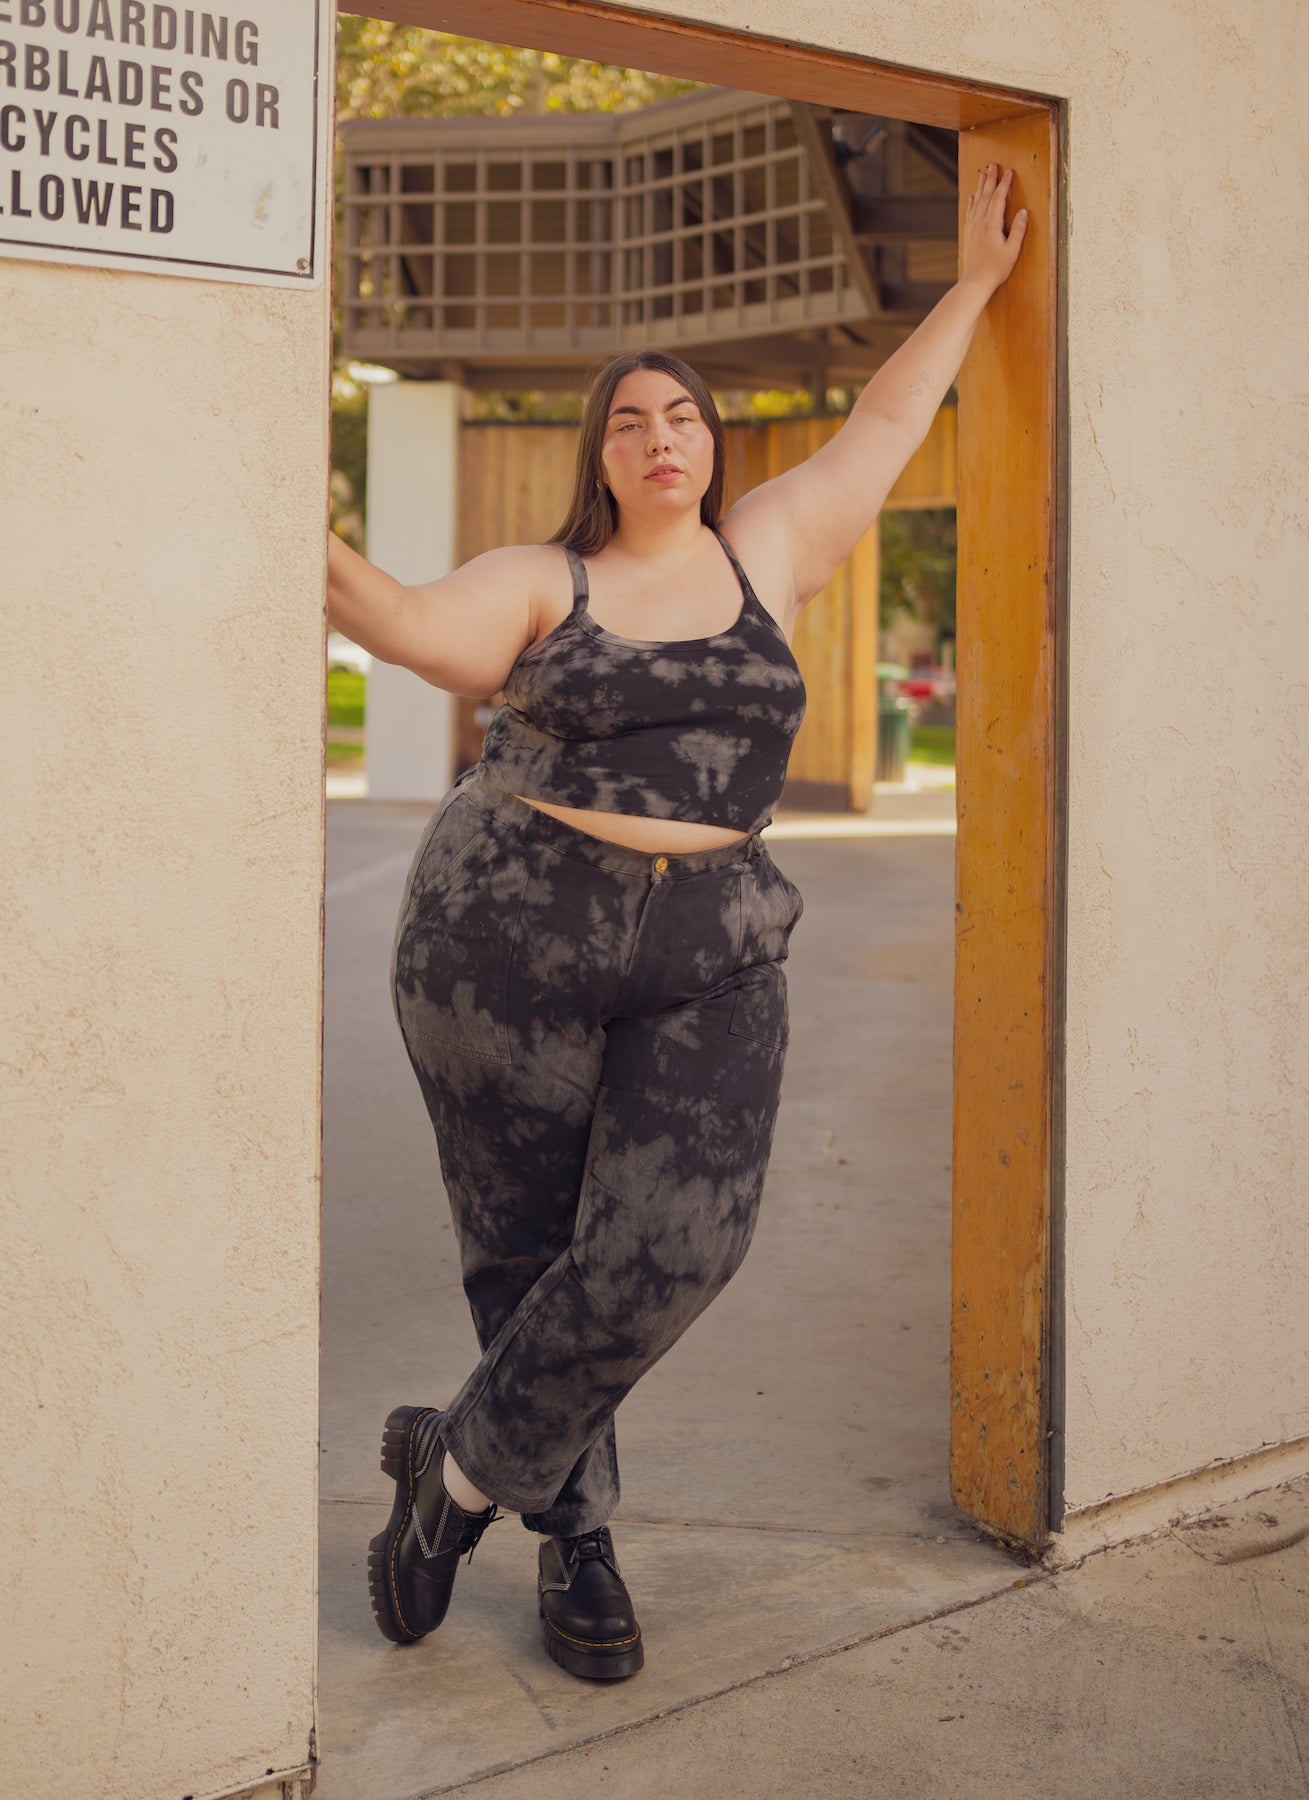 Marielena is wearing Cropped Cami in Black Magic Waters and Black Magic Waters Work Pants